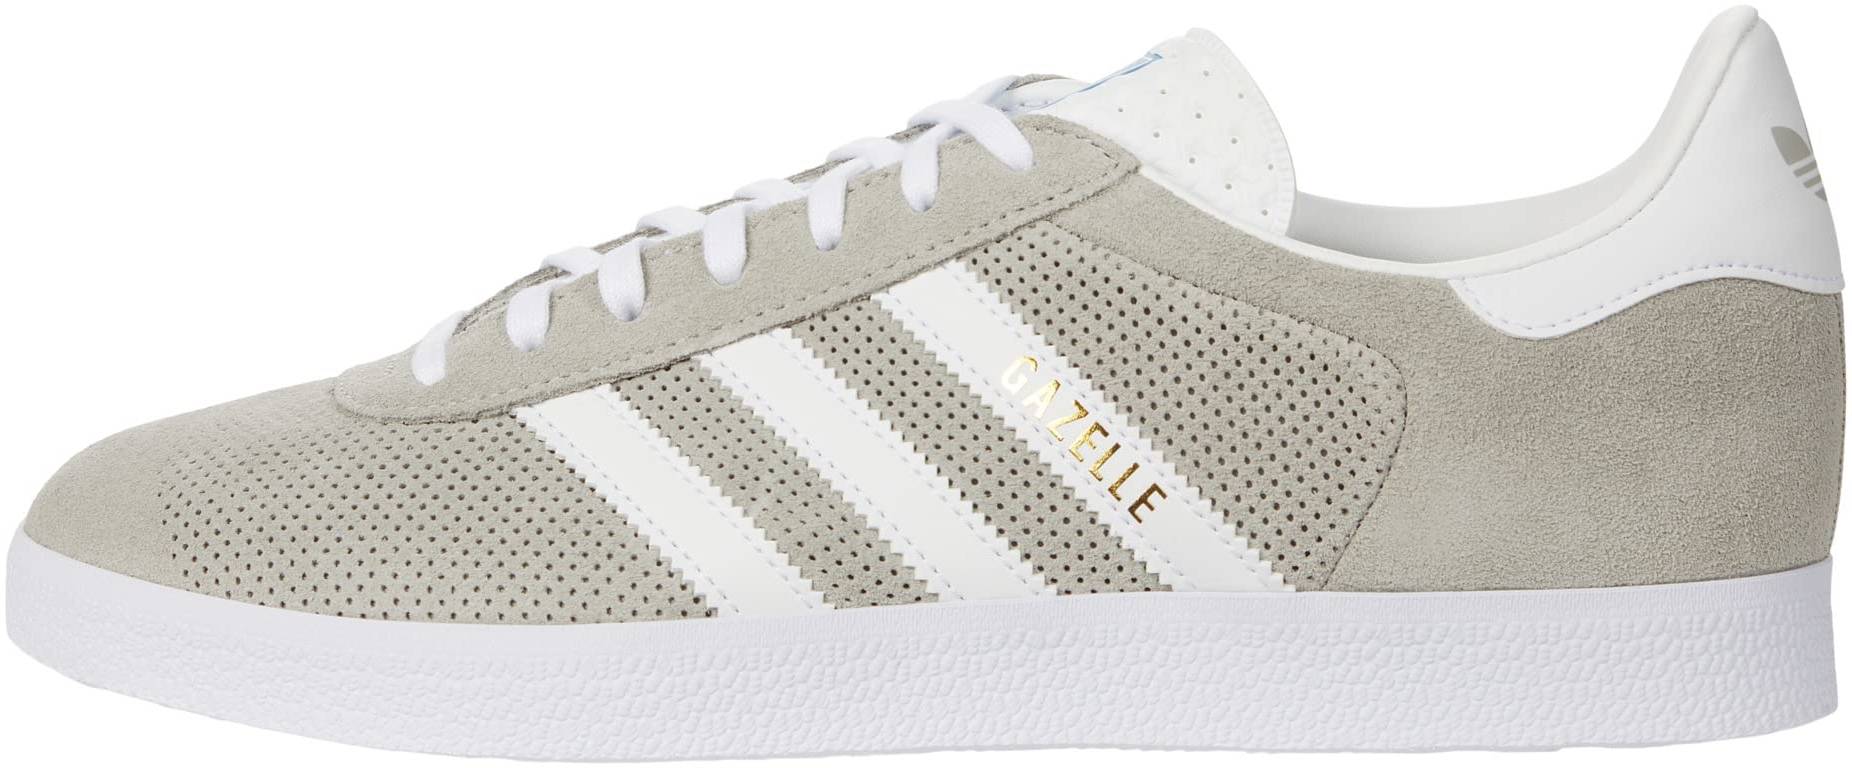 Adidas Gazelle Foundation sneakers in 5 colors (only $53) | RunRepeat